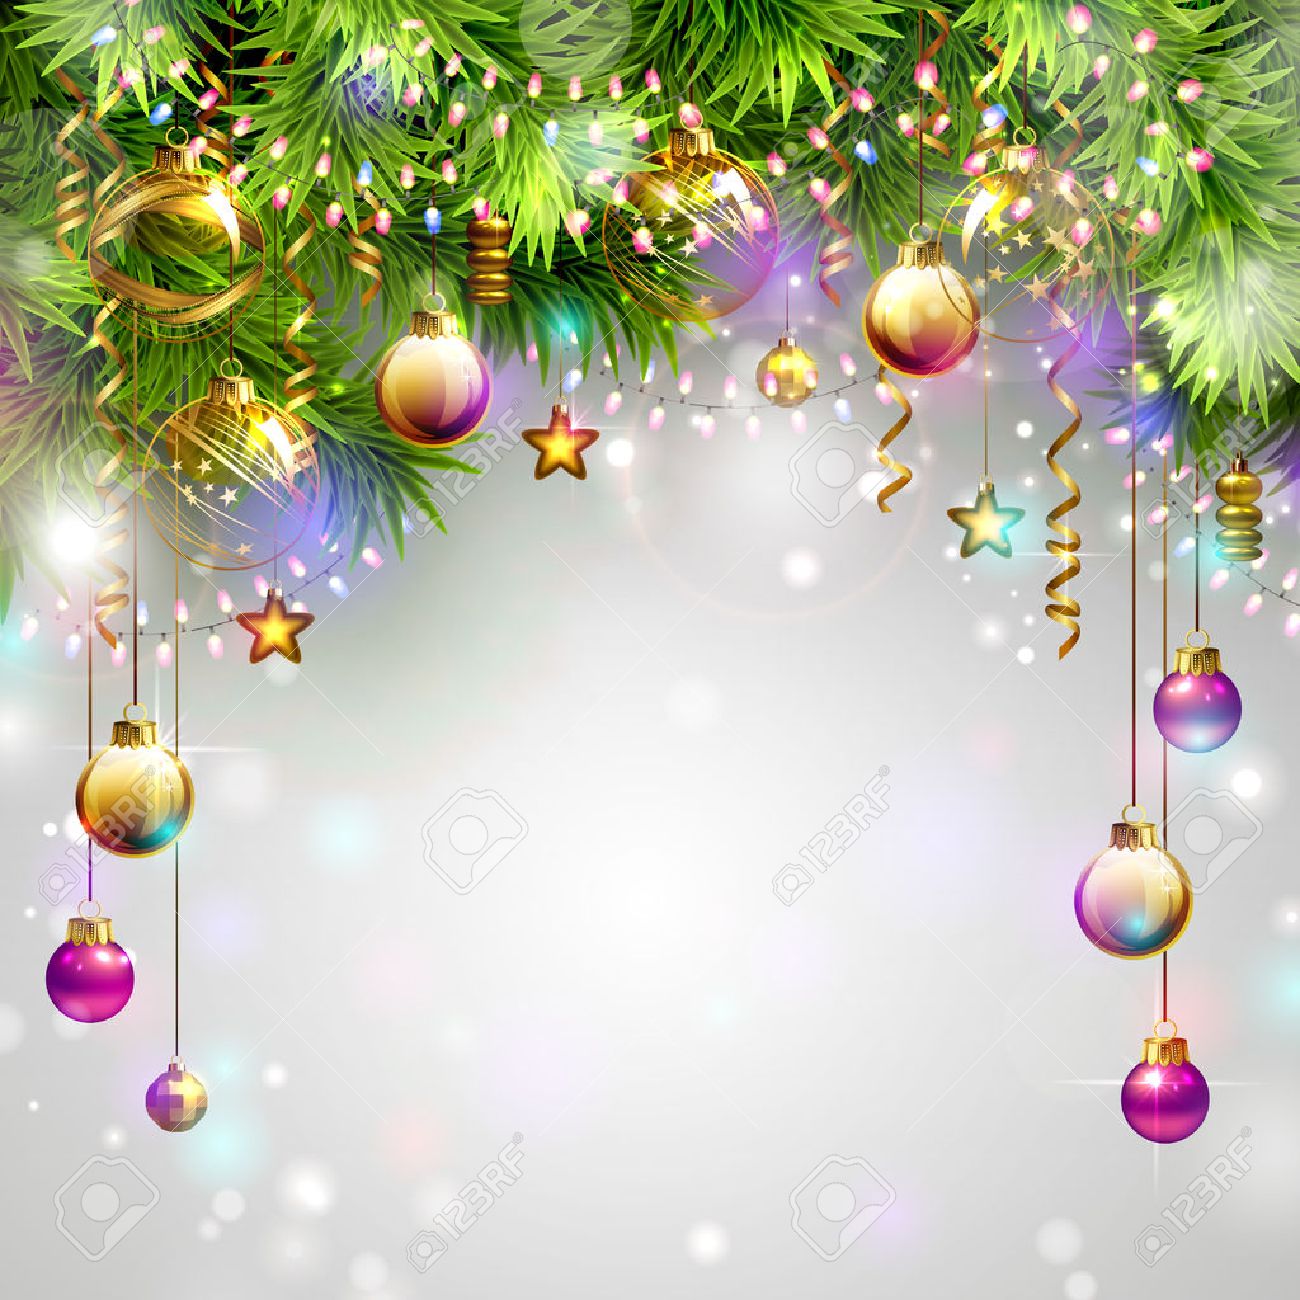 Christmas Backgrounds With Evening Balls Garlands And Fir trees